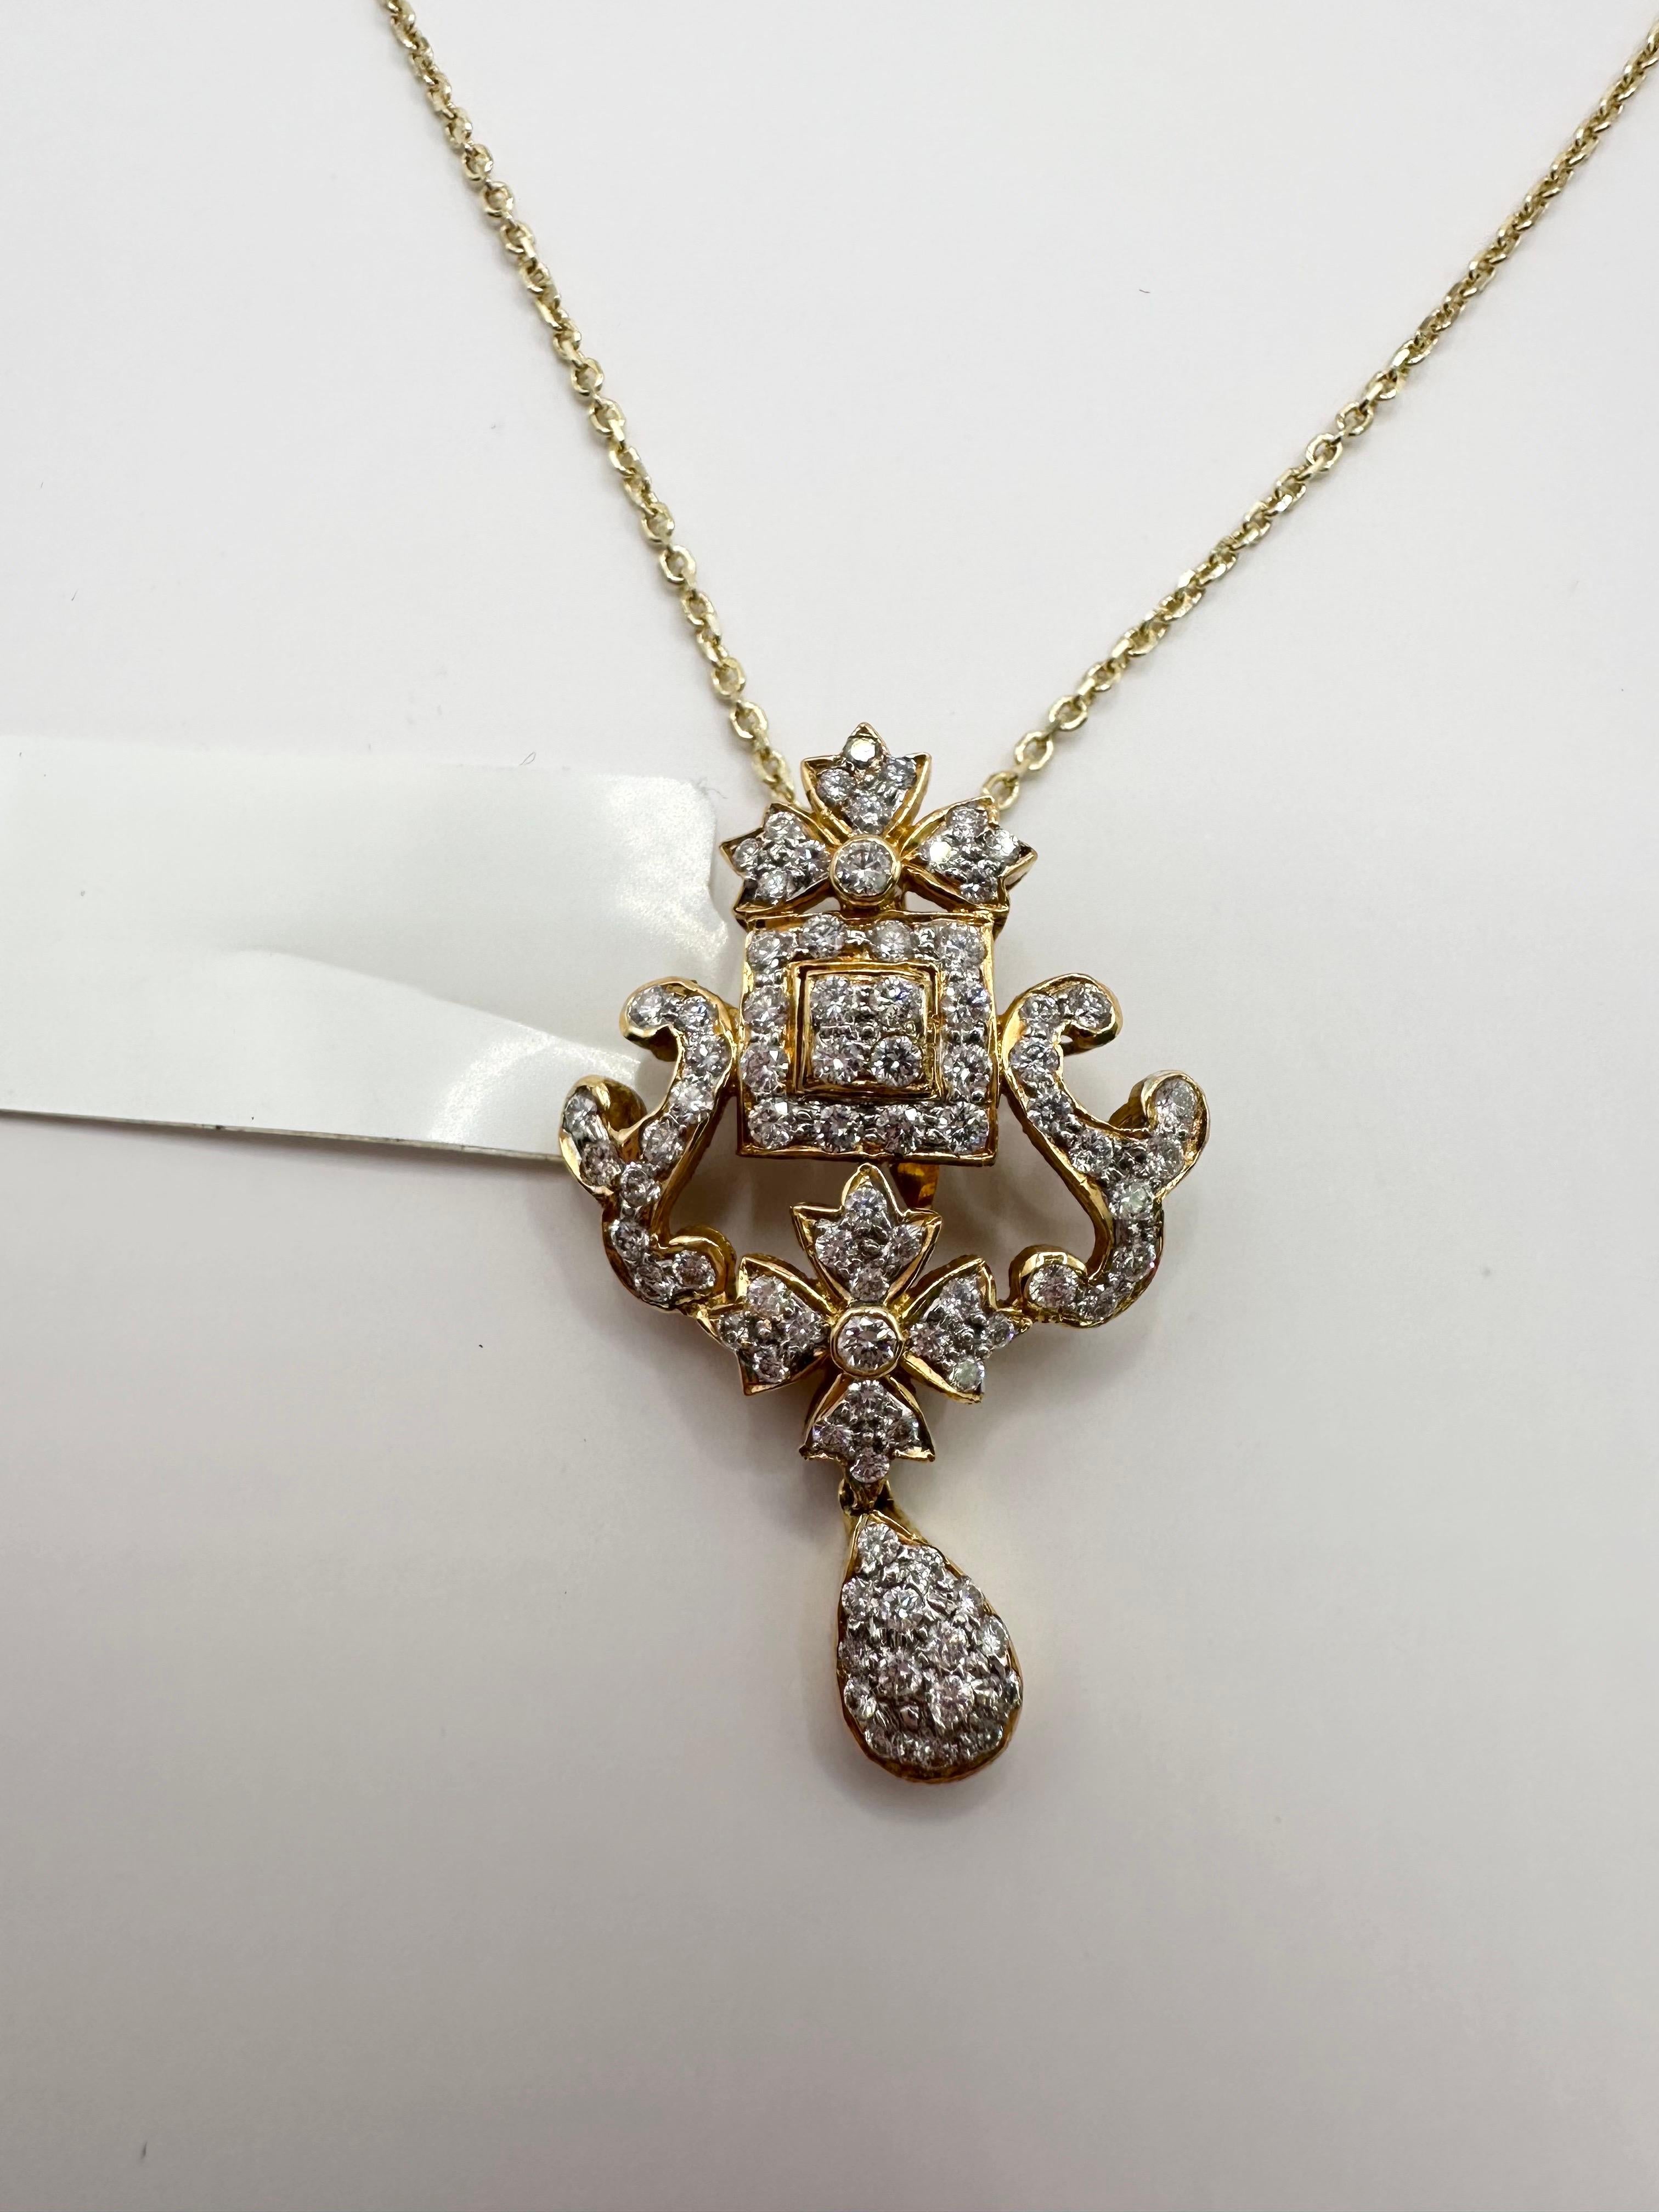 Elegant pendant necklace made with 1ct of natural diamonds in 18KT yellow gold.

Metal Type: 18KT

Natural Diamond(s): 
Color: F-G
Cut:Round Brilliant
Carat: 1ct
Clarity: VS-SI 

Certificate of authenticity comes with purchase!

ABOUT US
We are a